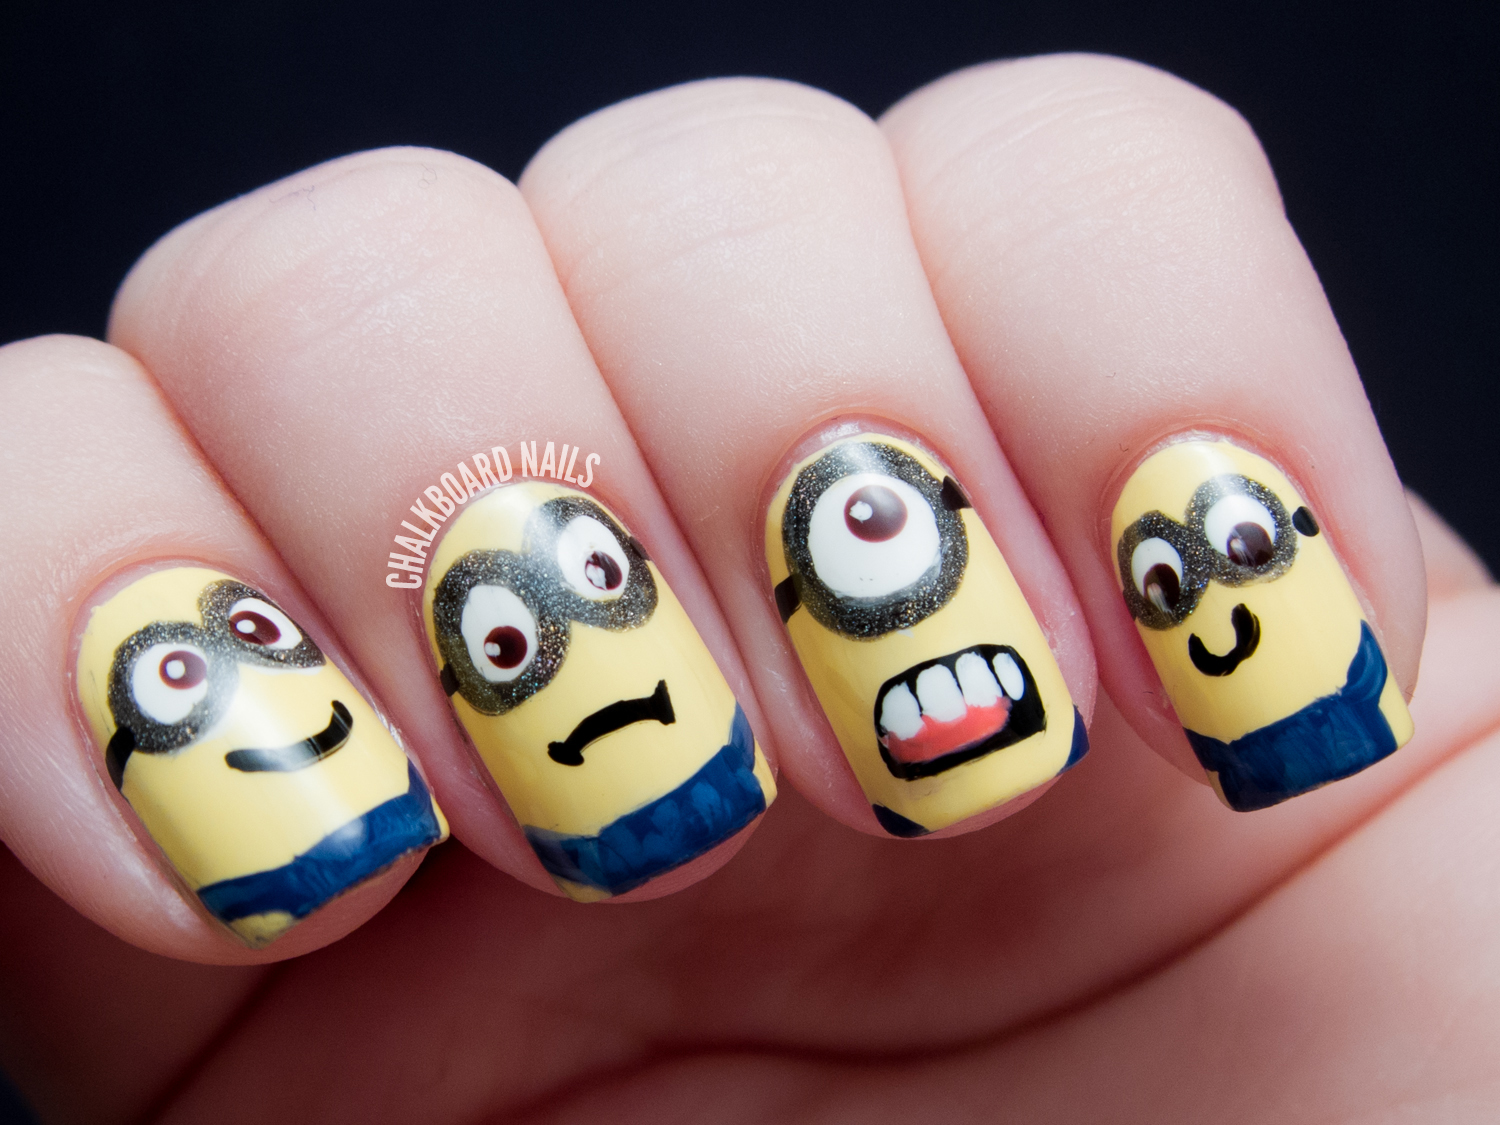 ... nail art tutorials from chalkboard nails let the cute minions stay